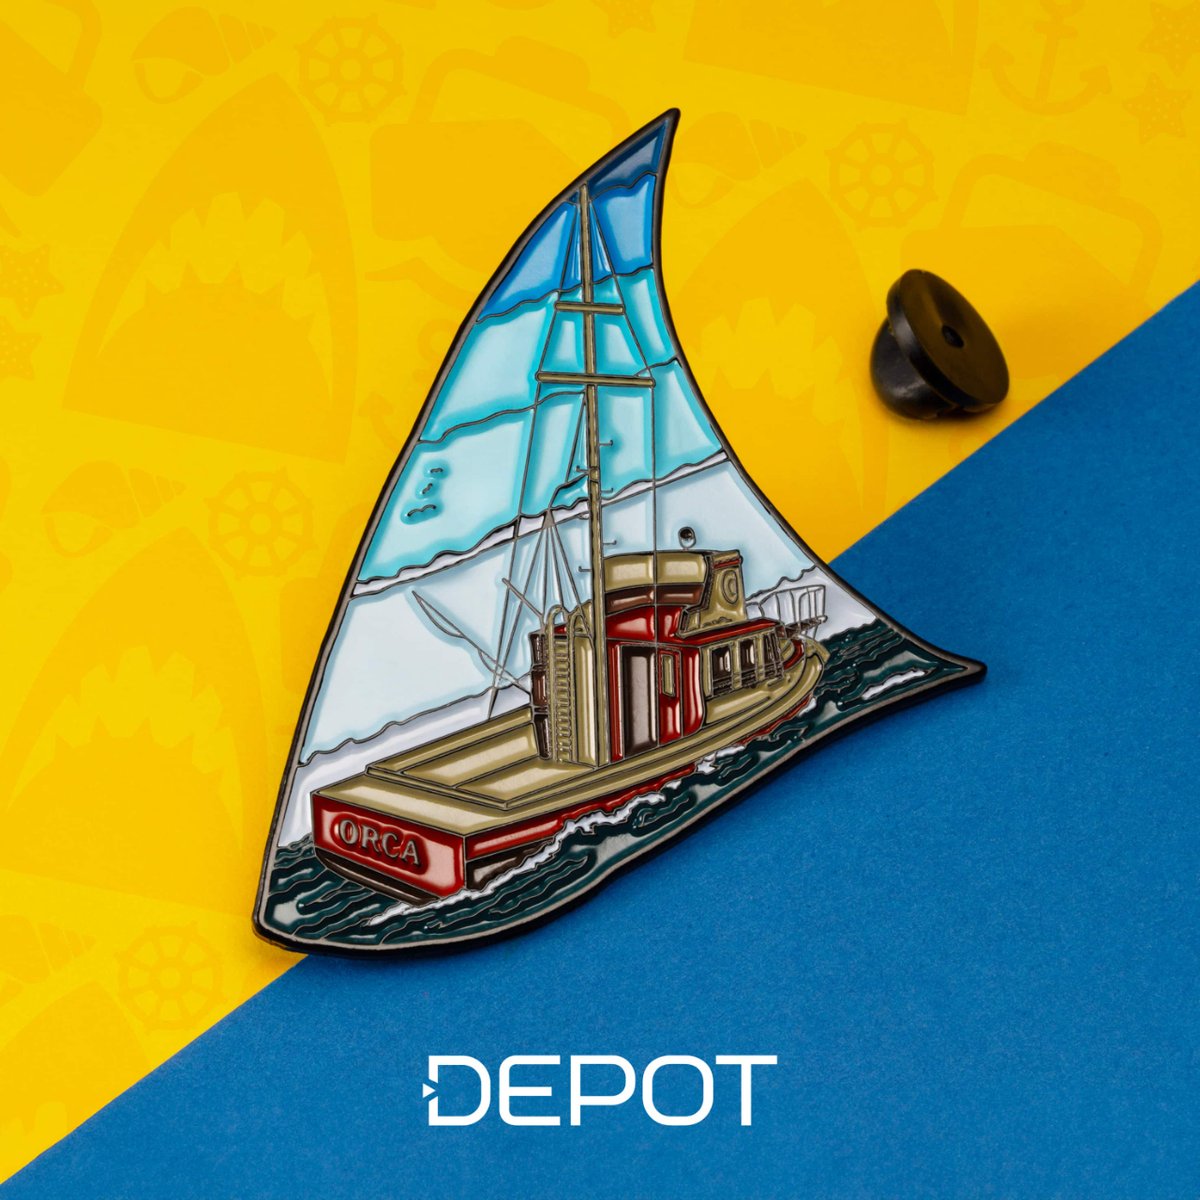 Smooth sailing when it comes to making custom enamel pins with Pin Depot! ⛵🦈
.
.
.
#pindepot #depot #pingame #enamelpins #lapelpins #pins #enamelpin #pinstagram #pingamestrong #lapelpin #pinsofig #hatpins #pin #pinlife #hatpin #pincollector #pincommunity #pinoftheday